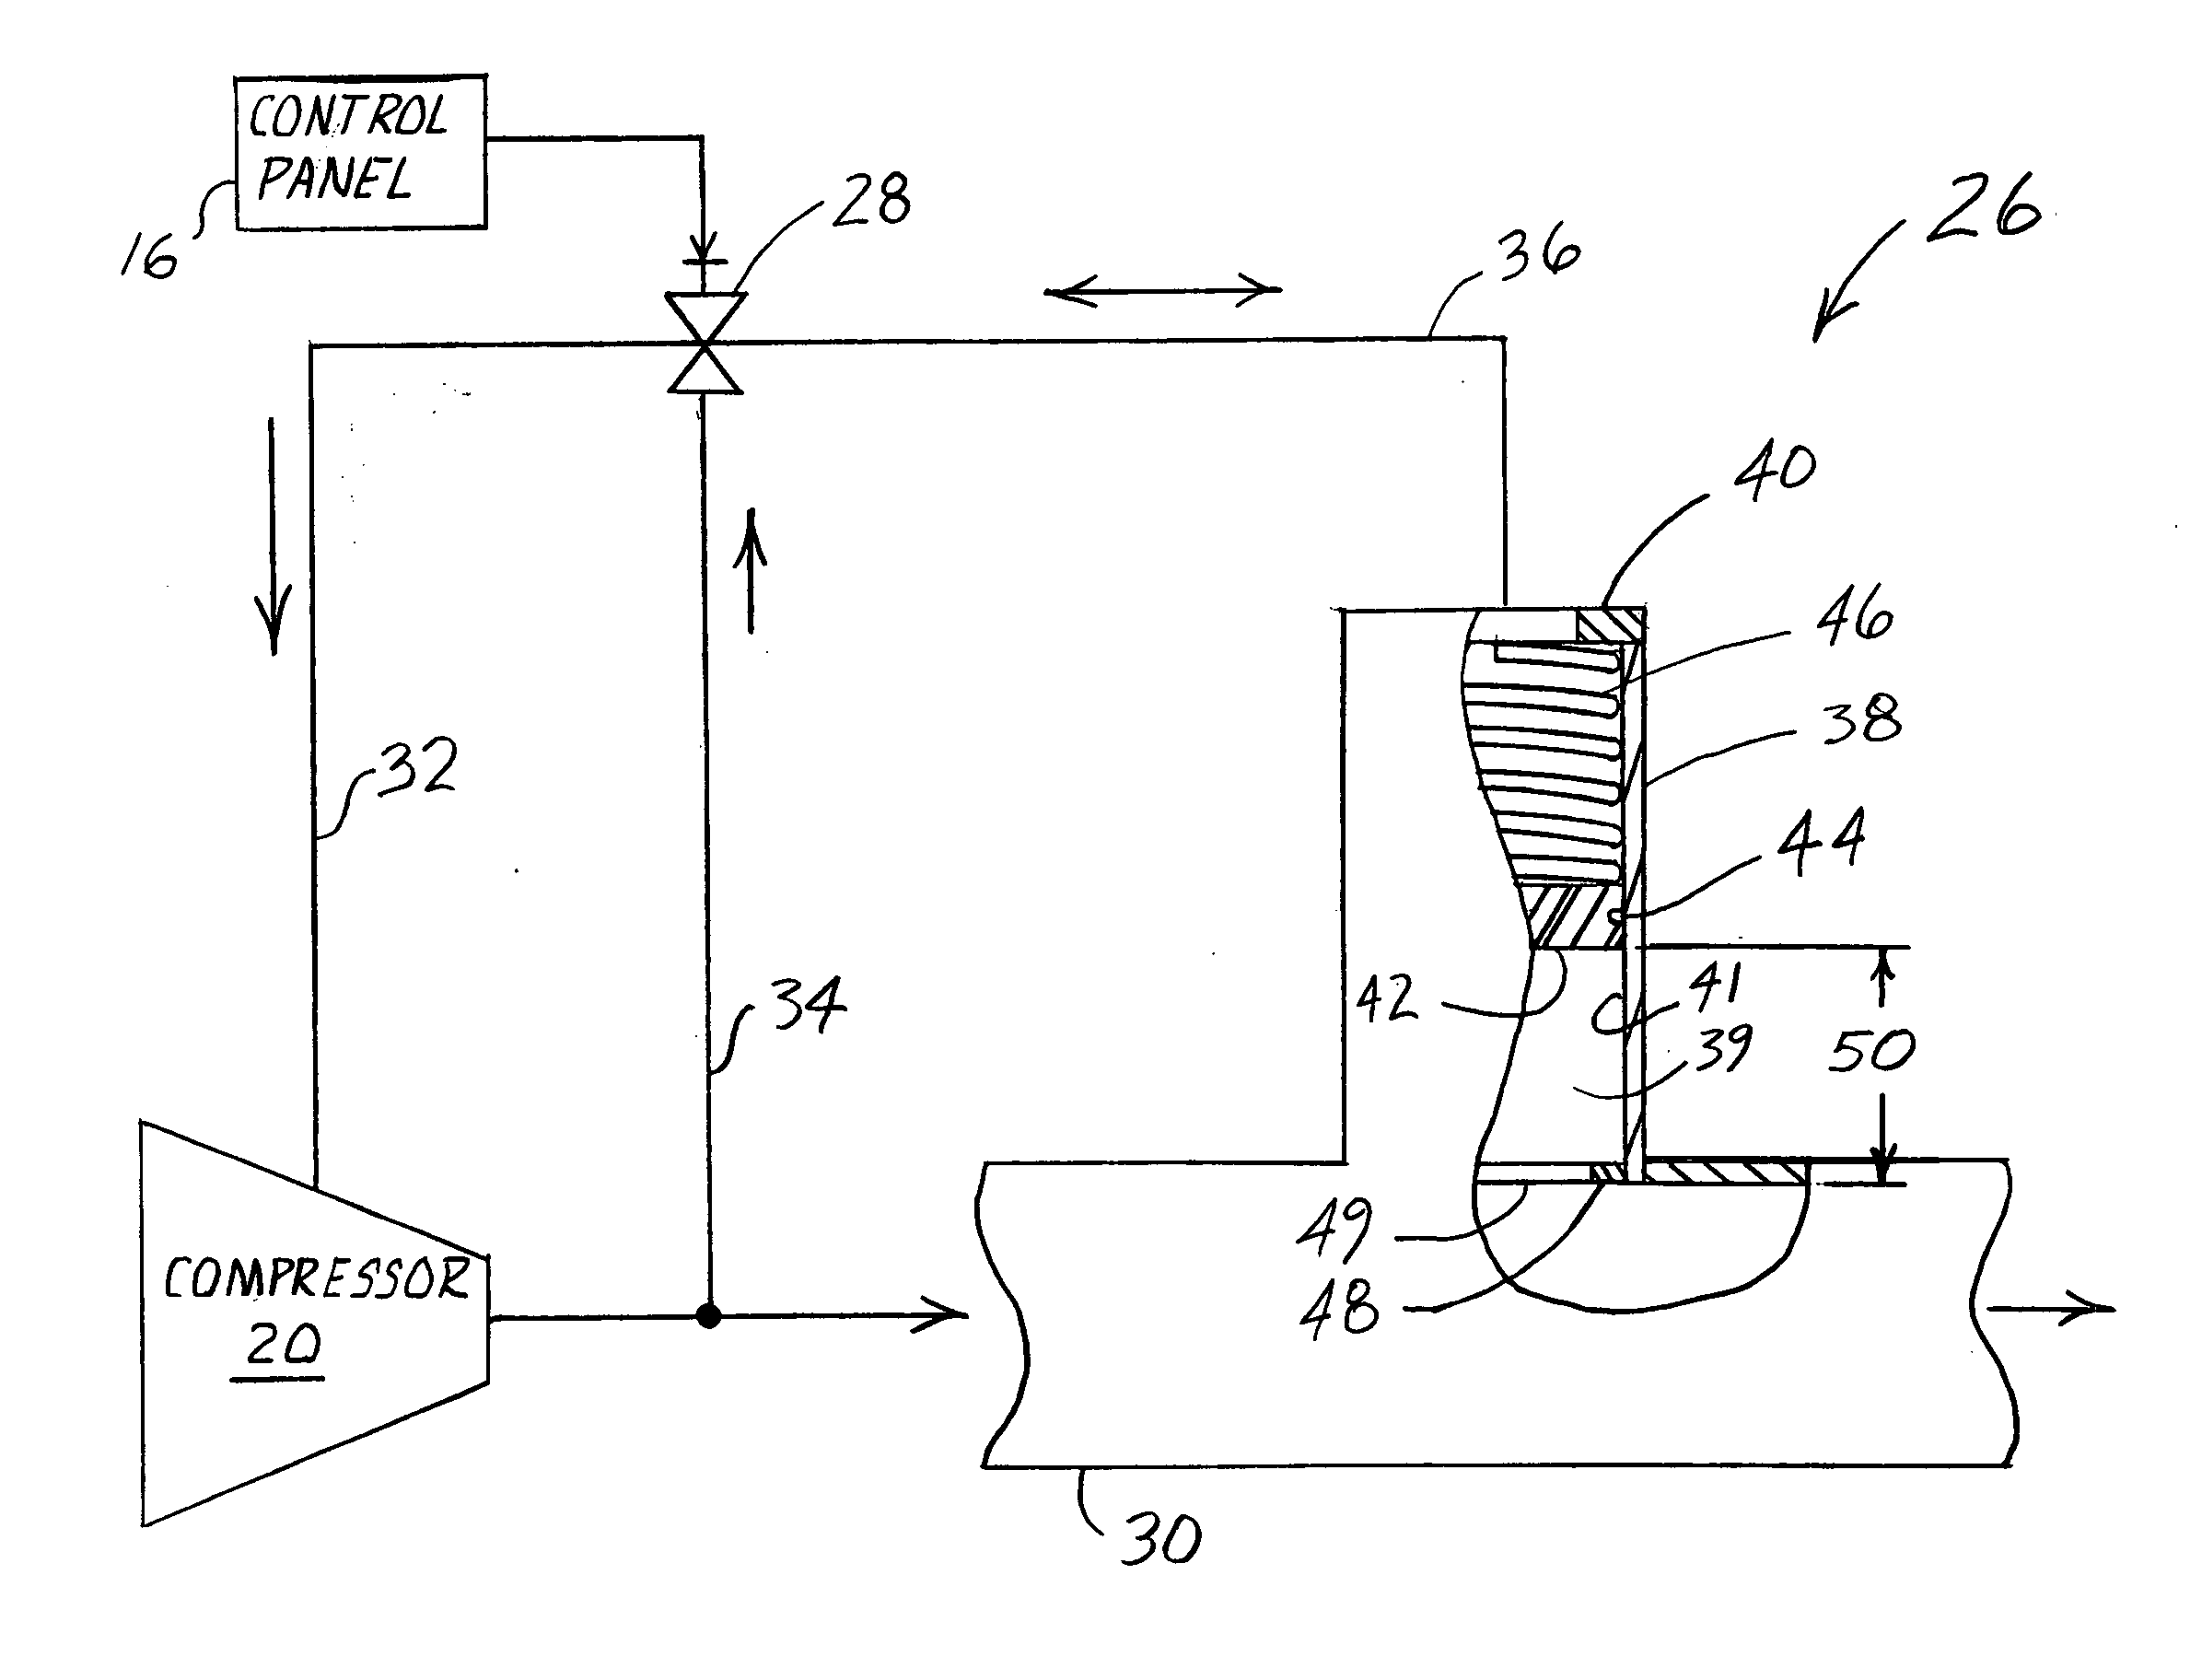 Apparatus and method of sound attenuation in a system employing a VSD and a quarter-wave resonator